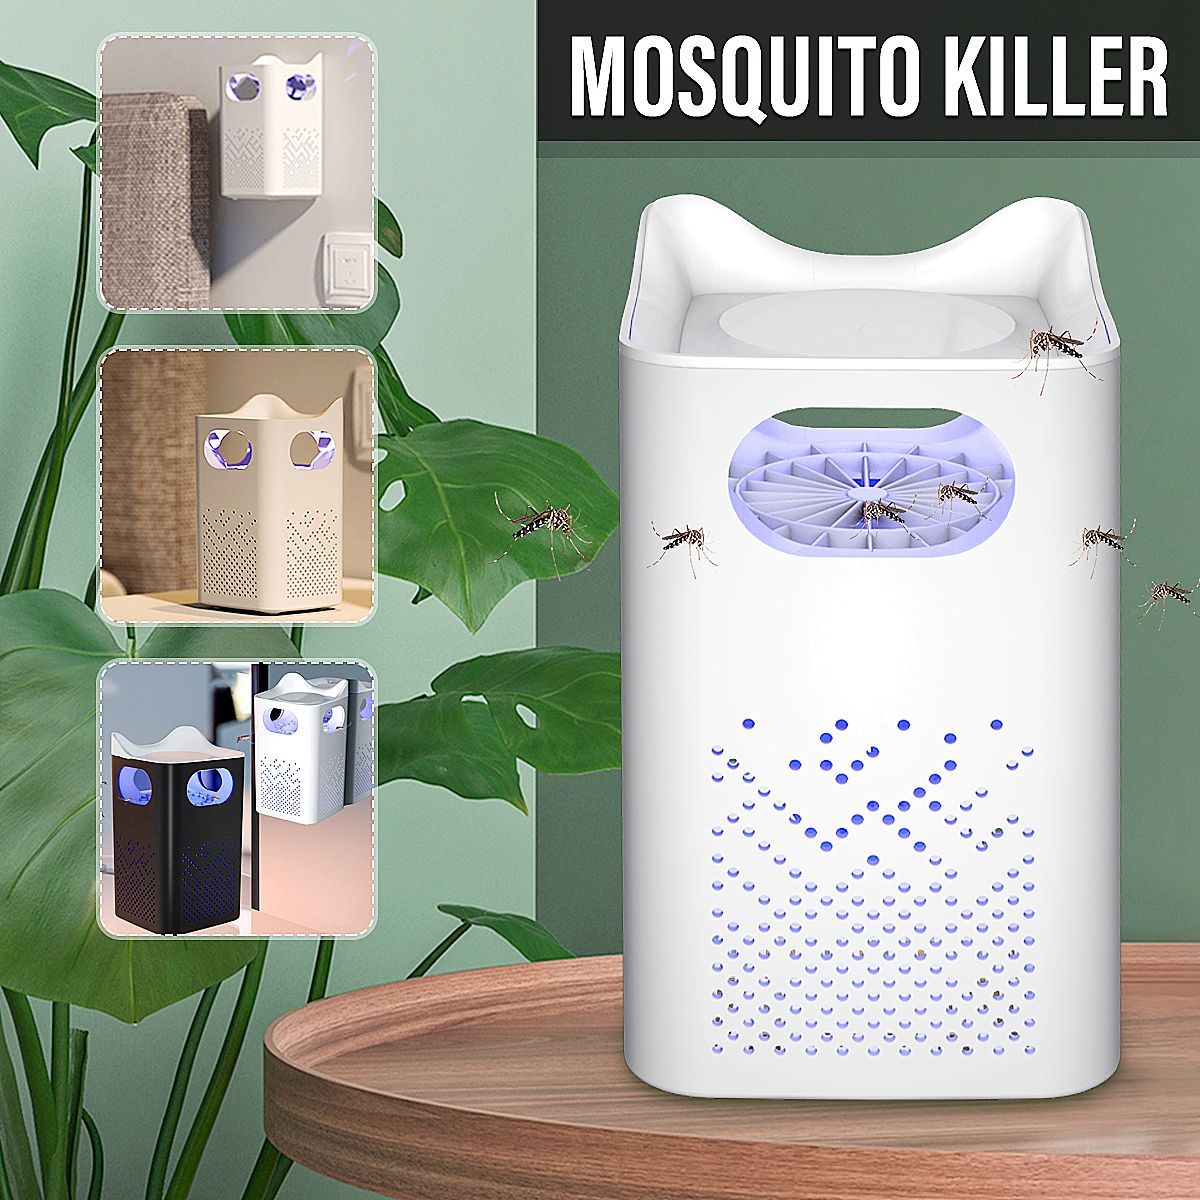 Electric-Mosquito-Insect-Killer-Lamp-USB-Charging-LED-Light-Zapper-Pest-Control-Insect-Catcher-Trap--1693918